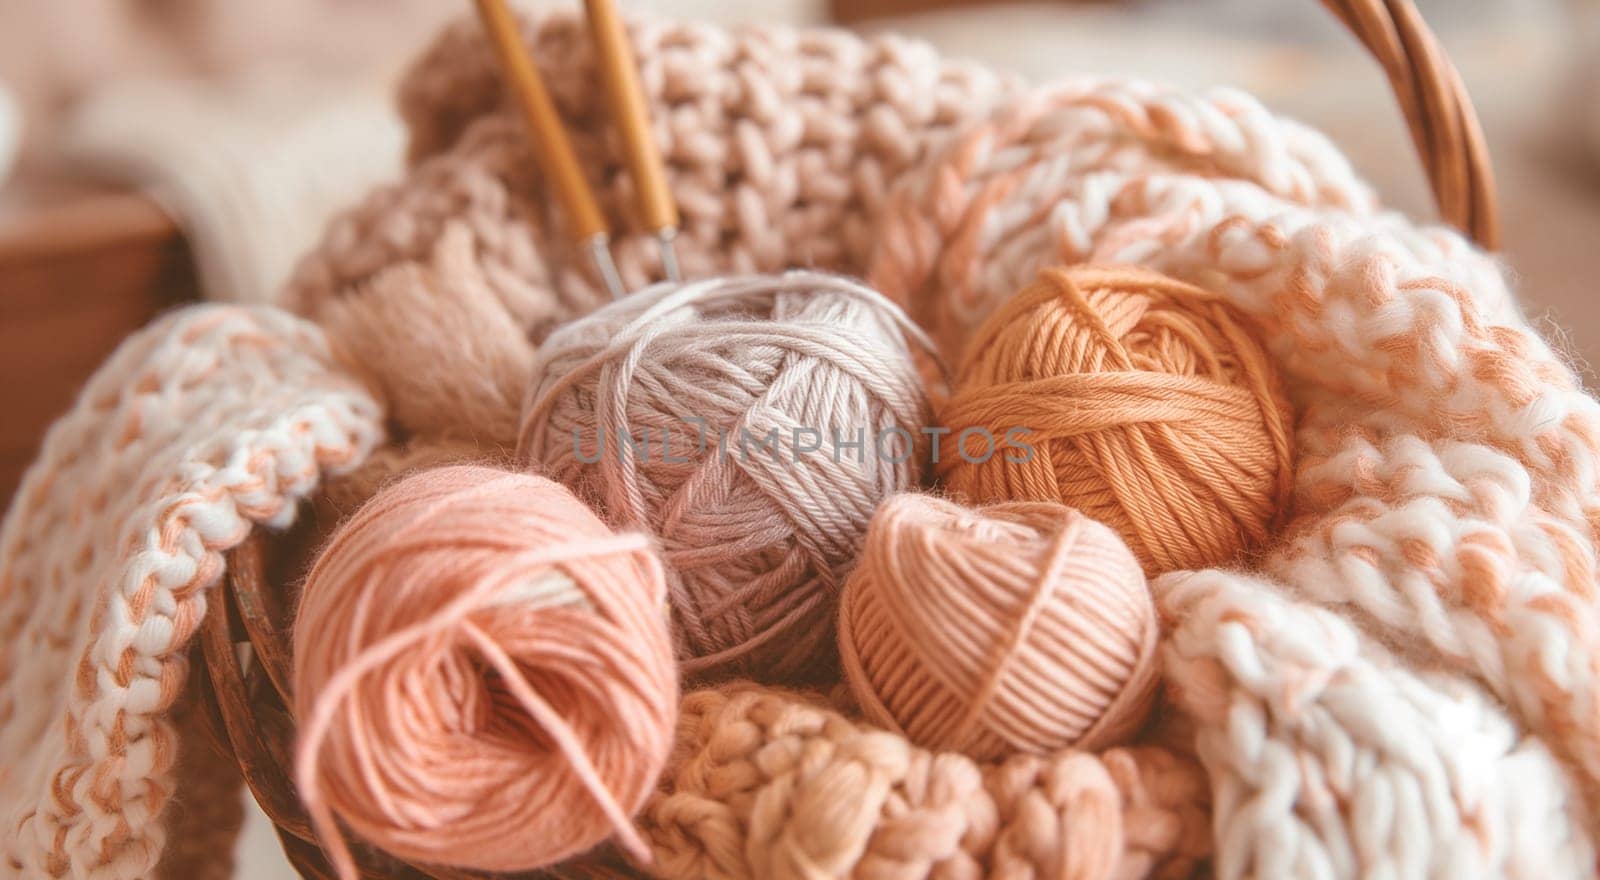 Yarn balls in a basket with knitting needles, warm tones. High quality photo